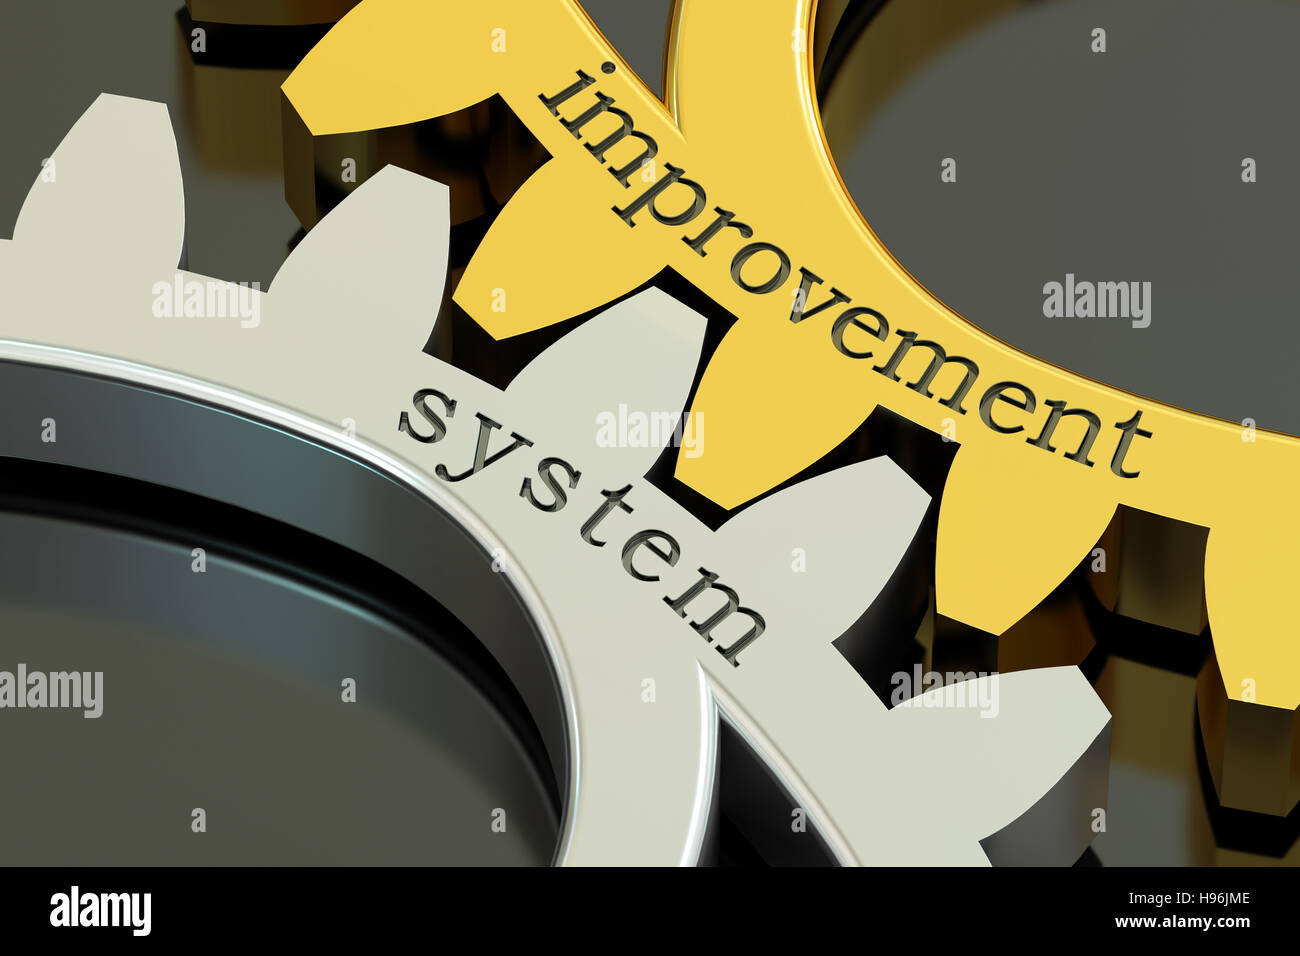 Improvement System concept on the gearwheels, 3D rendering Stock Photo